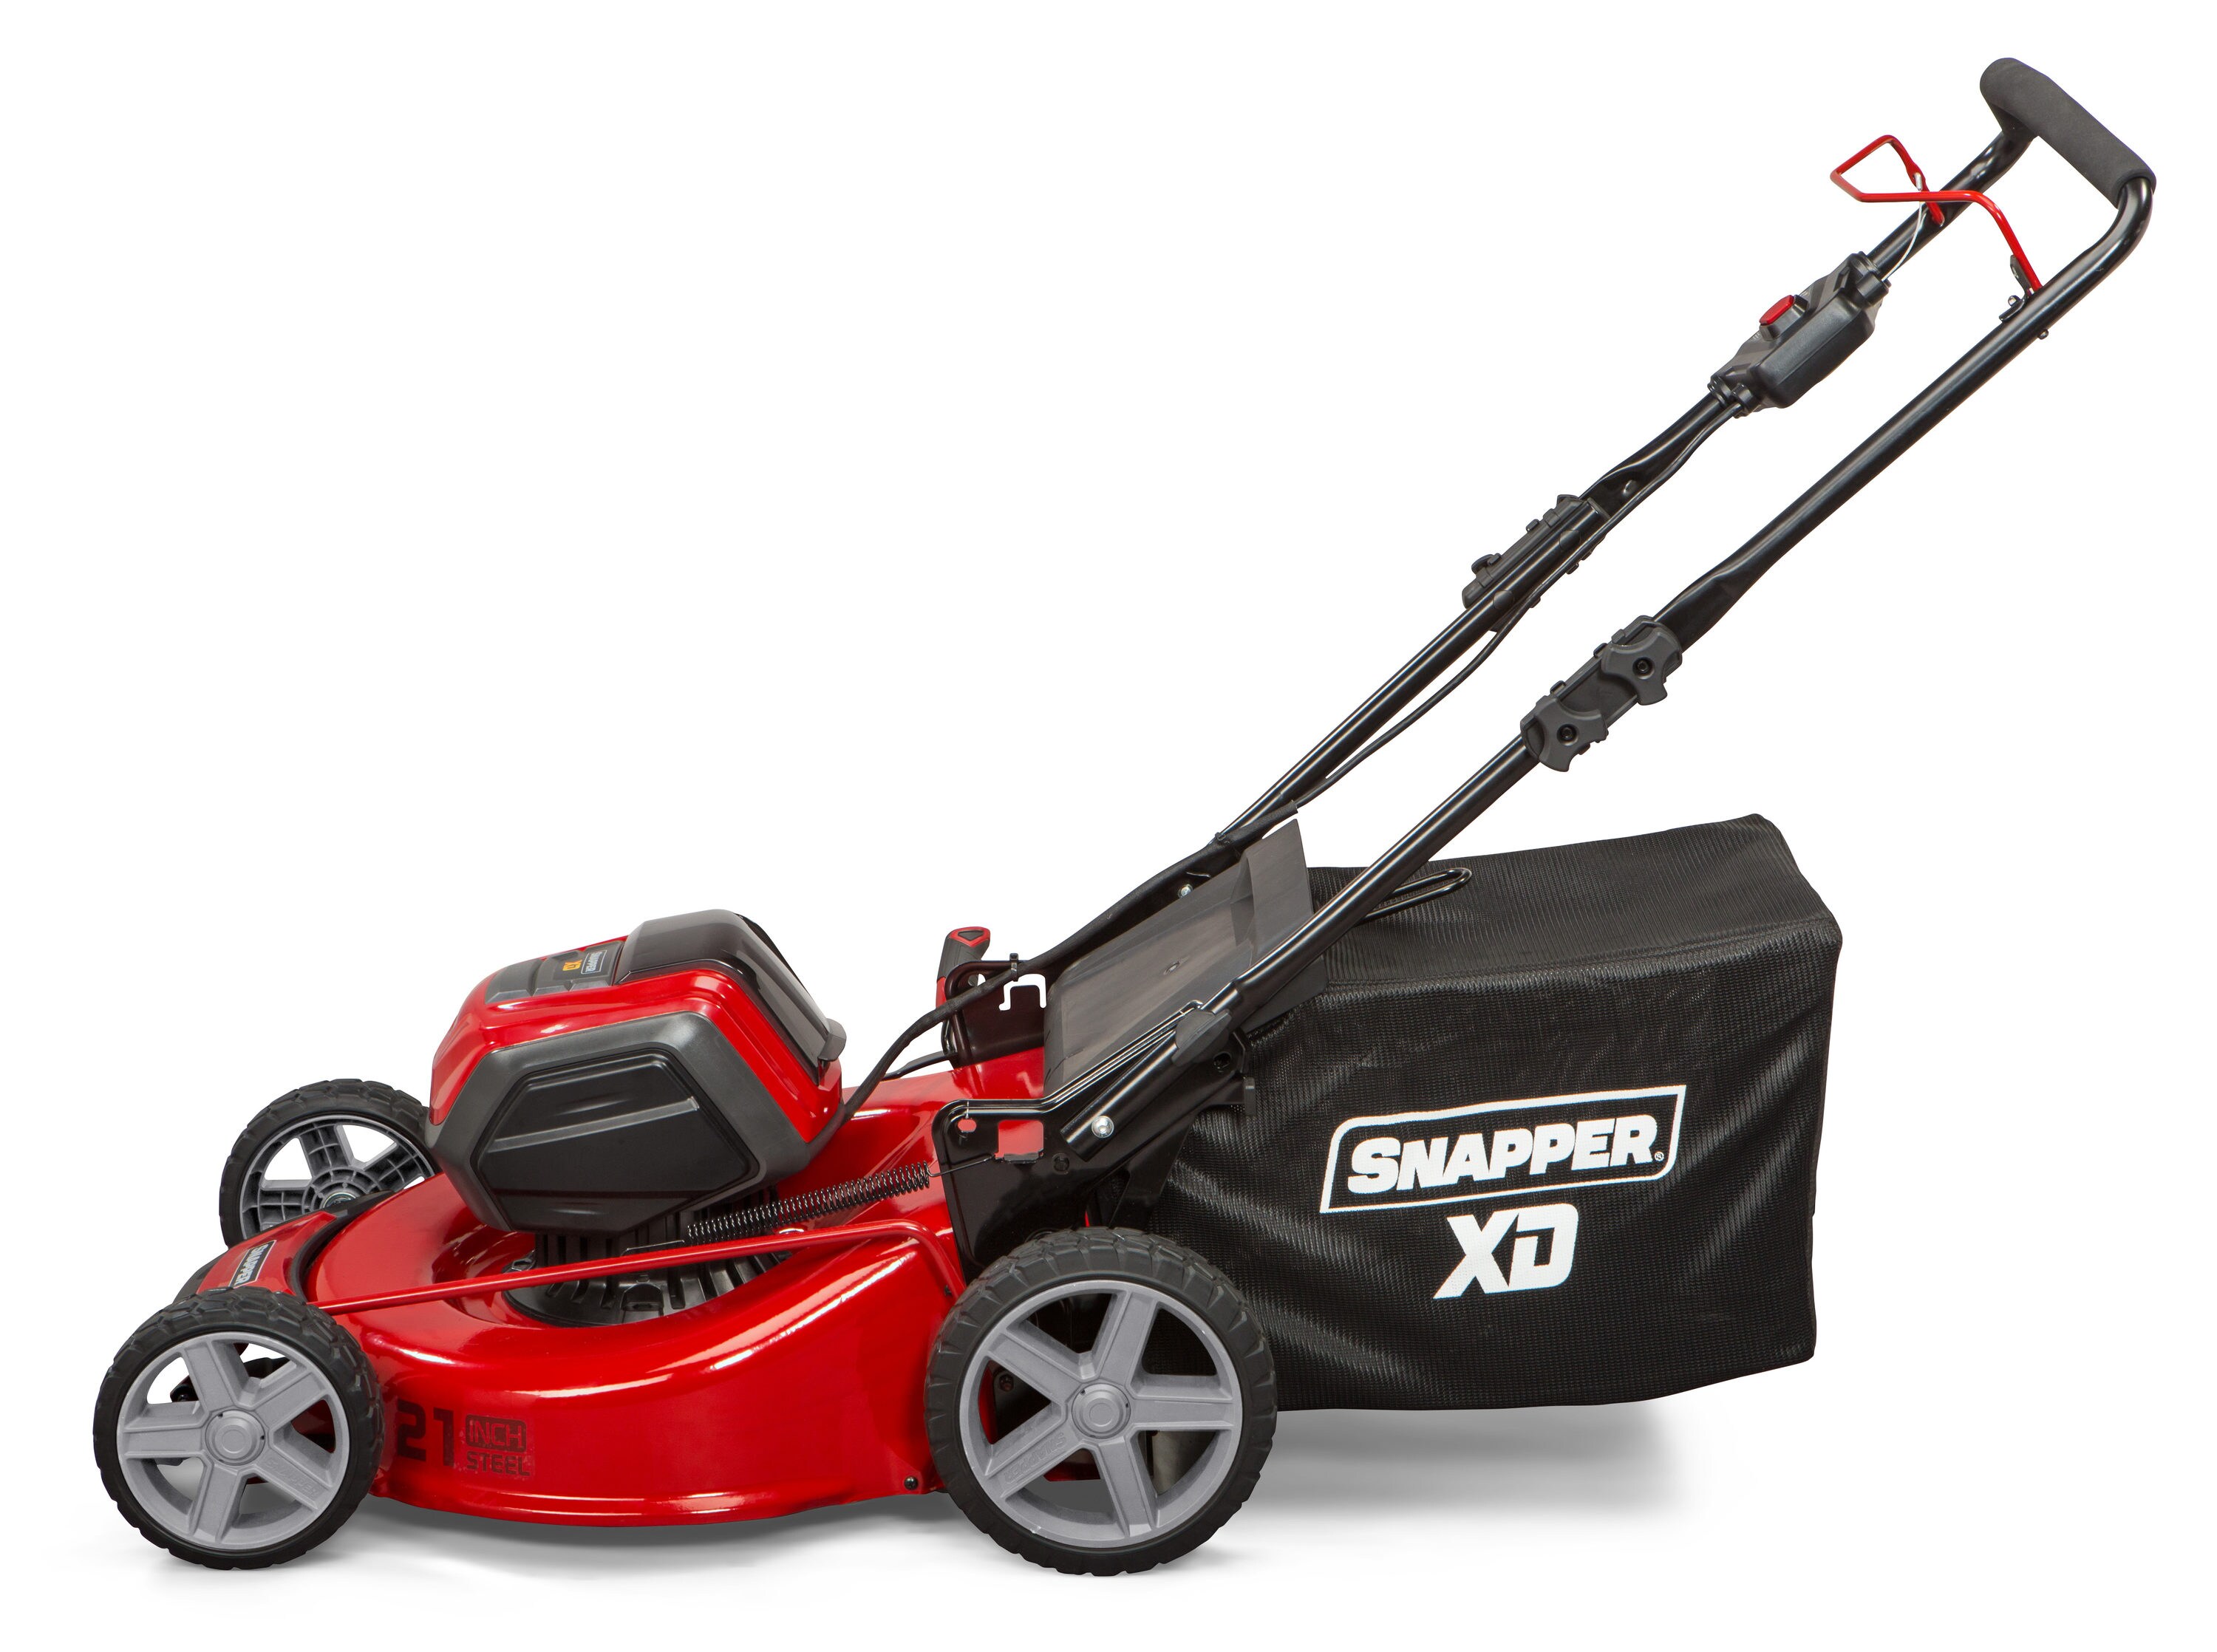 Snapper 1696777 XD 82 Volt 21 Inch Electric Cordless Walk Behind Lawn Mower Red for sale online 